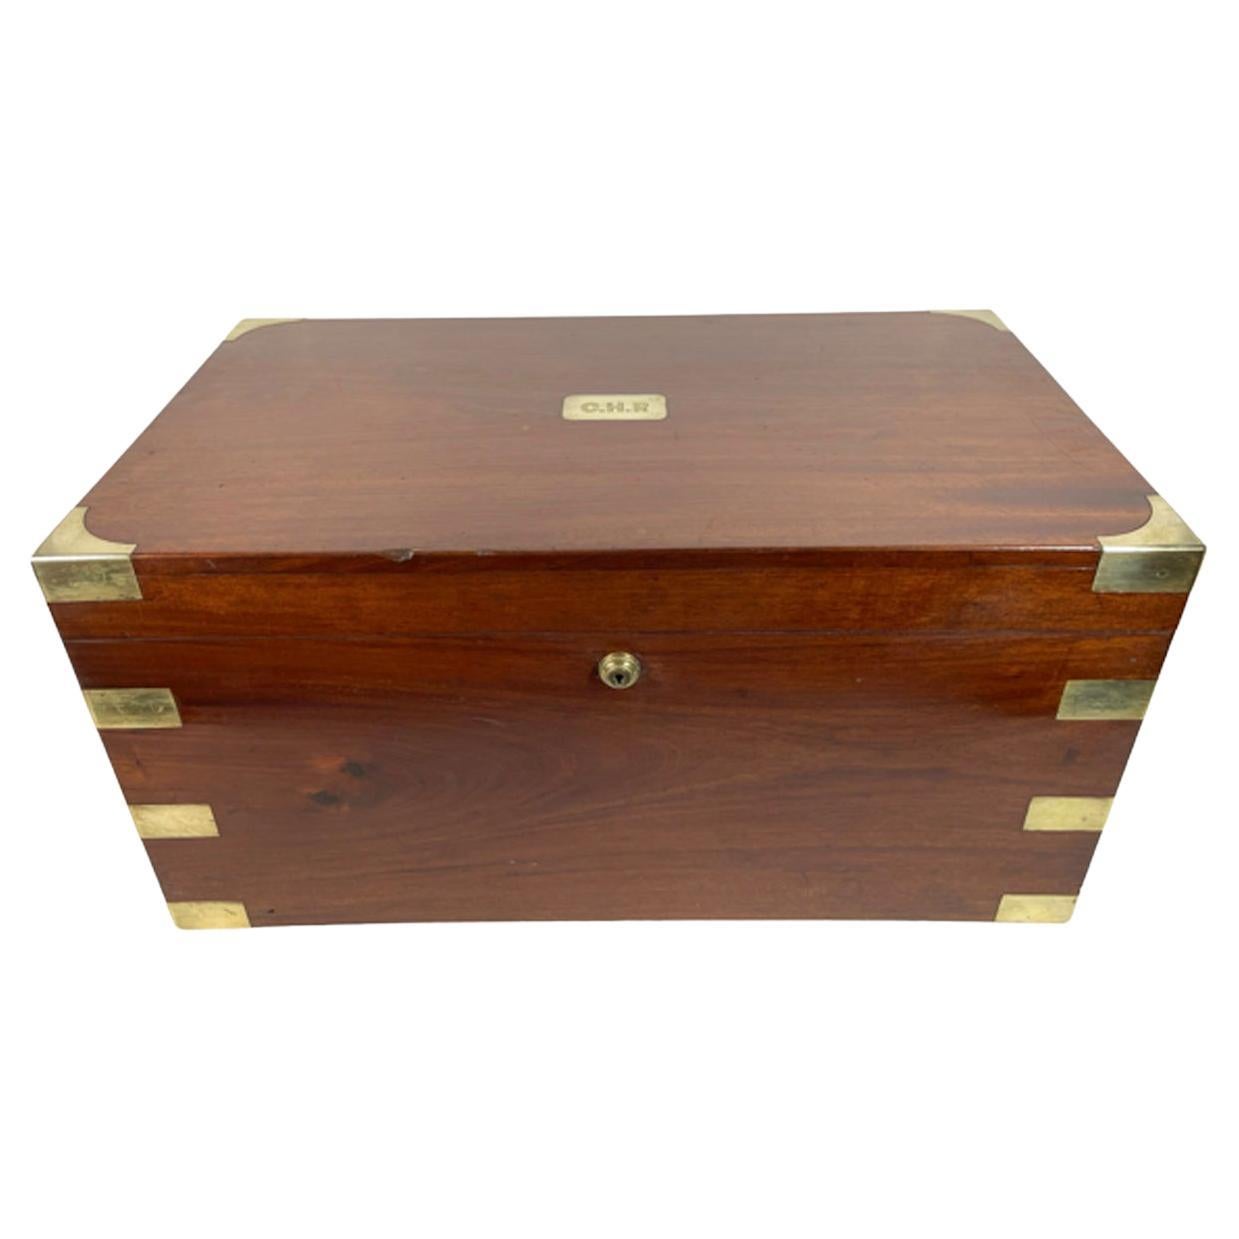 Early 20th Century Brass Mounted Mahogany Benson & Hedges Campaign Style Humidor For Sale